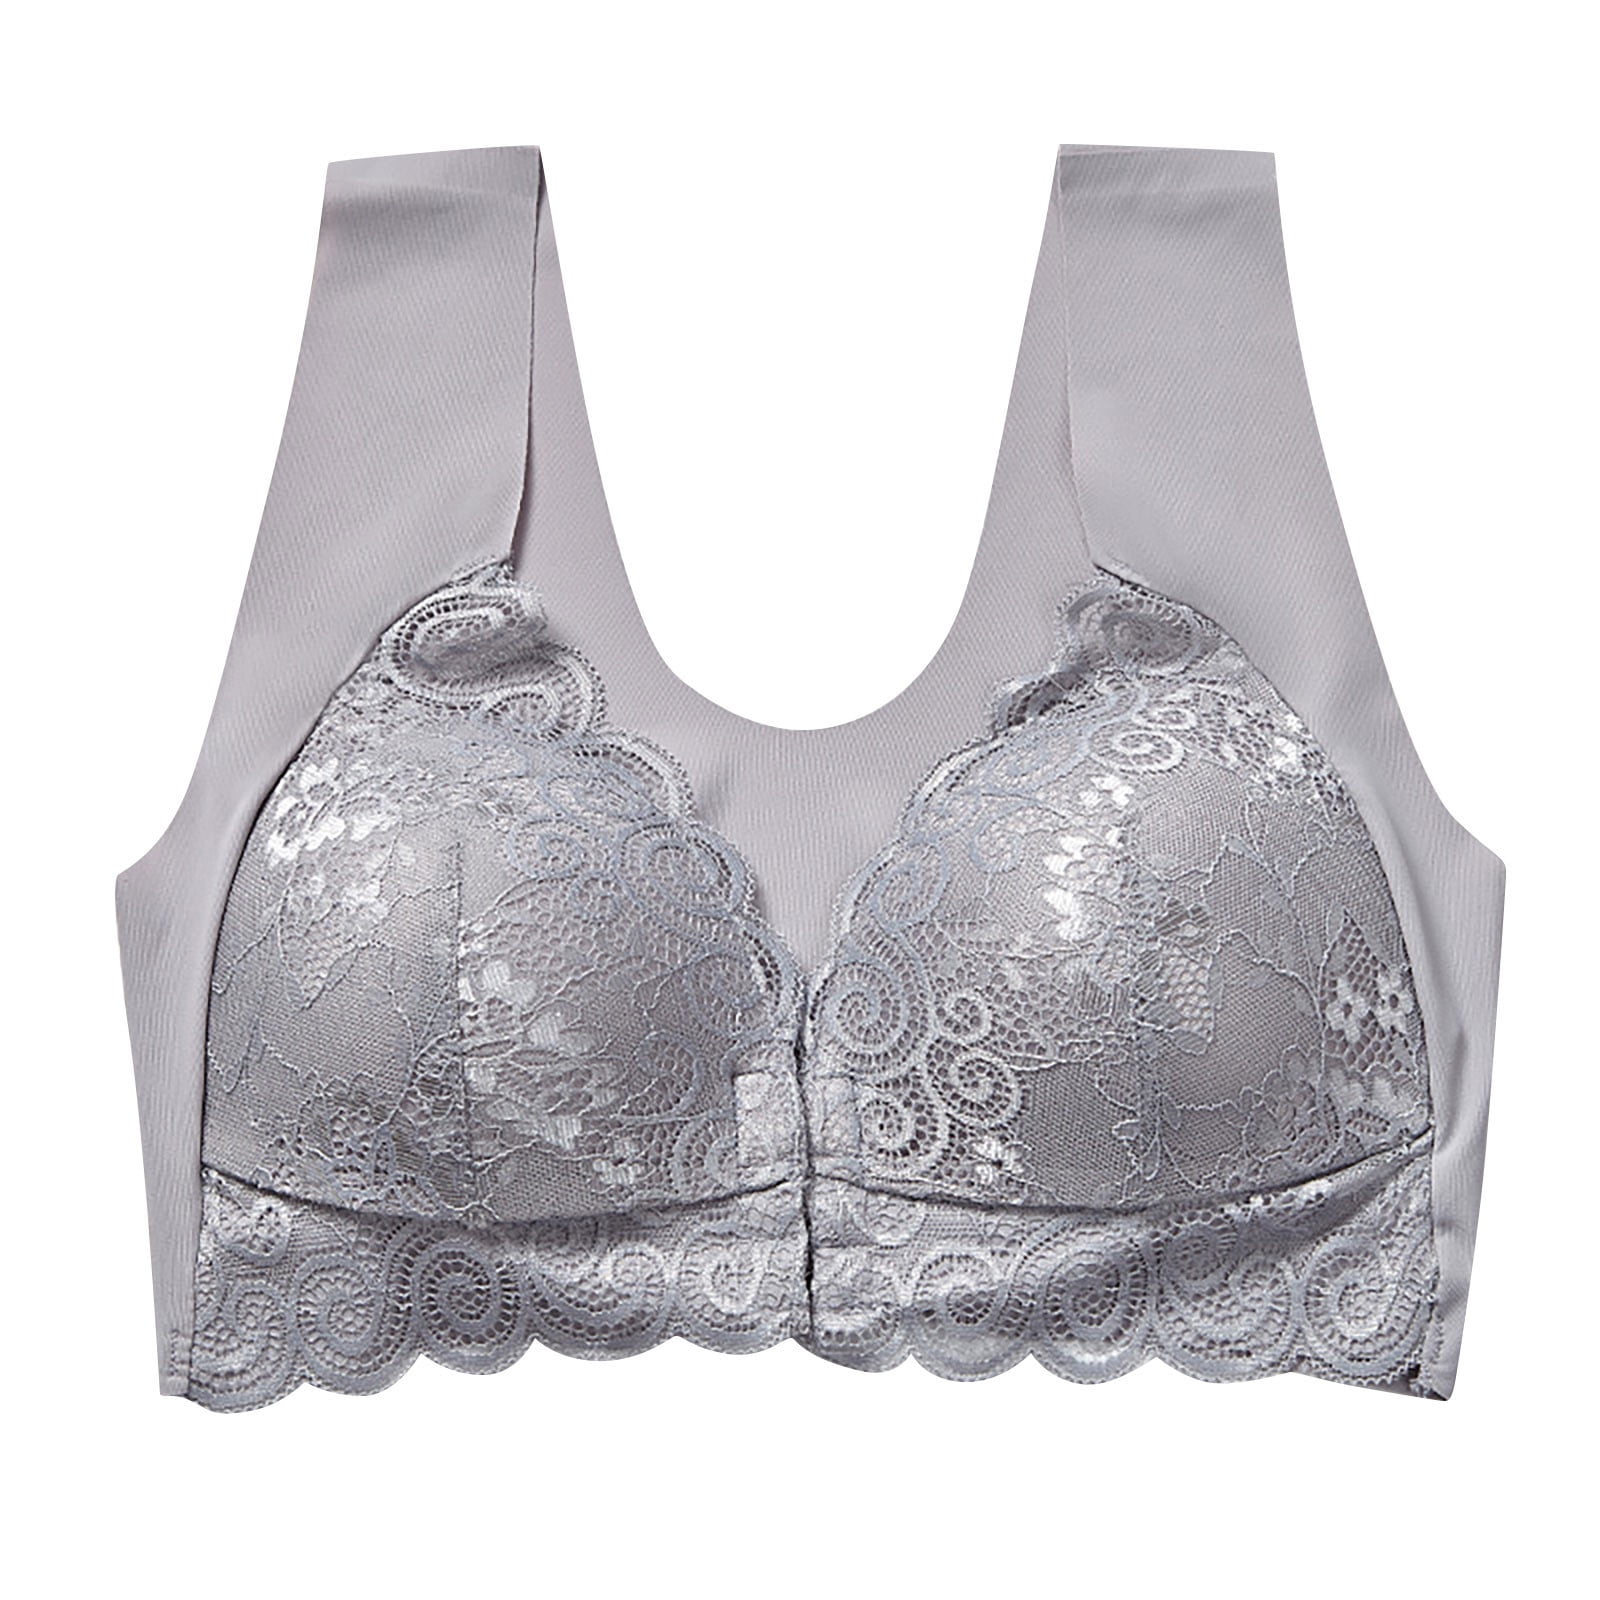 2021 Womens Latex Underwear With Lace And Seamless Design Thin,  Comfortable, And Stylish Sports Bra Hrx Vest For Girls And Women From  Sexyhanz, $10.26